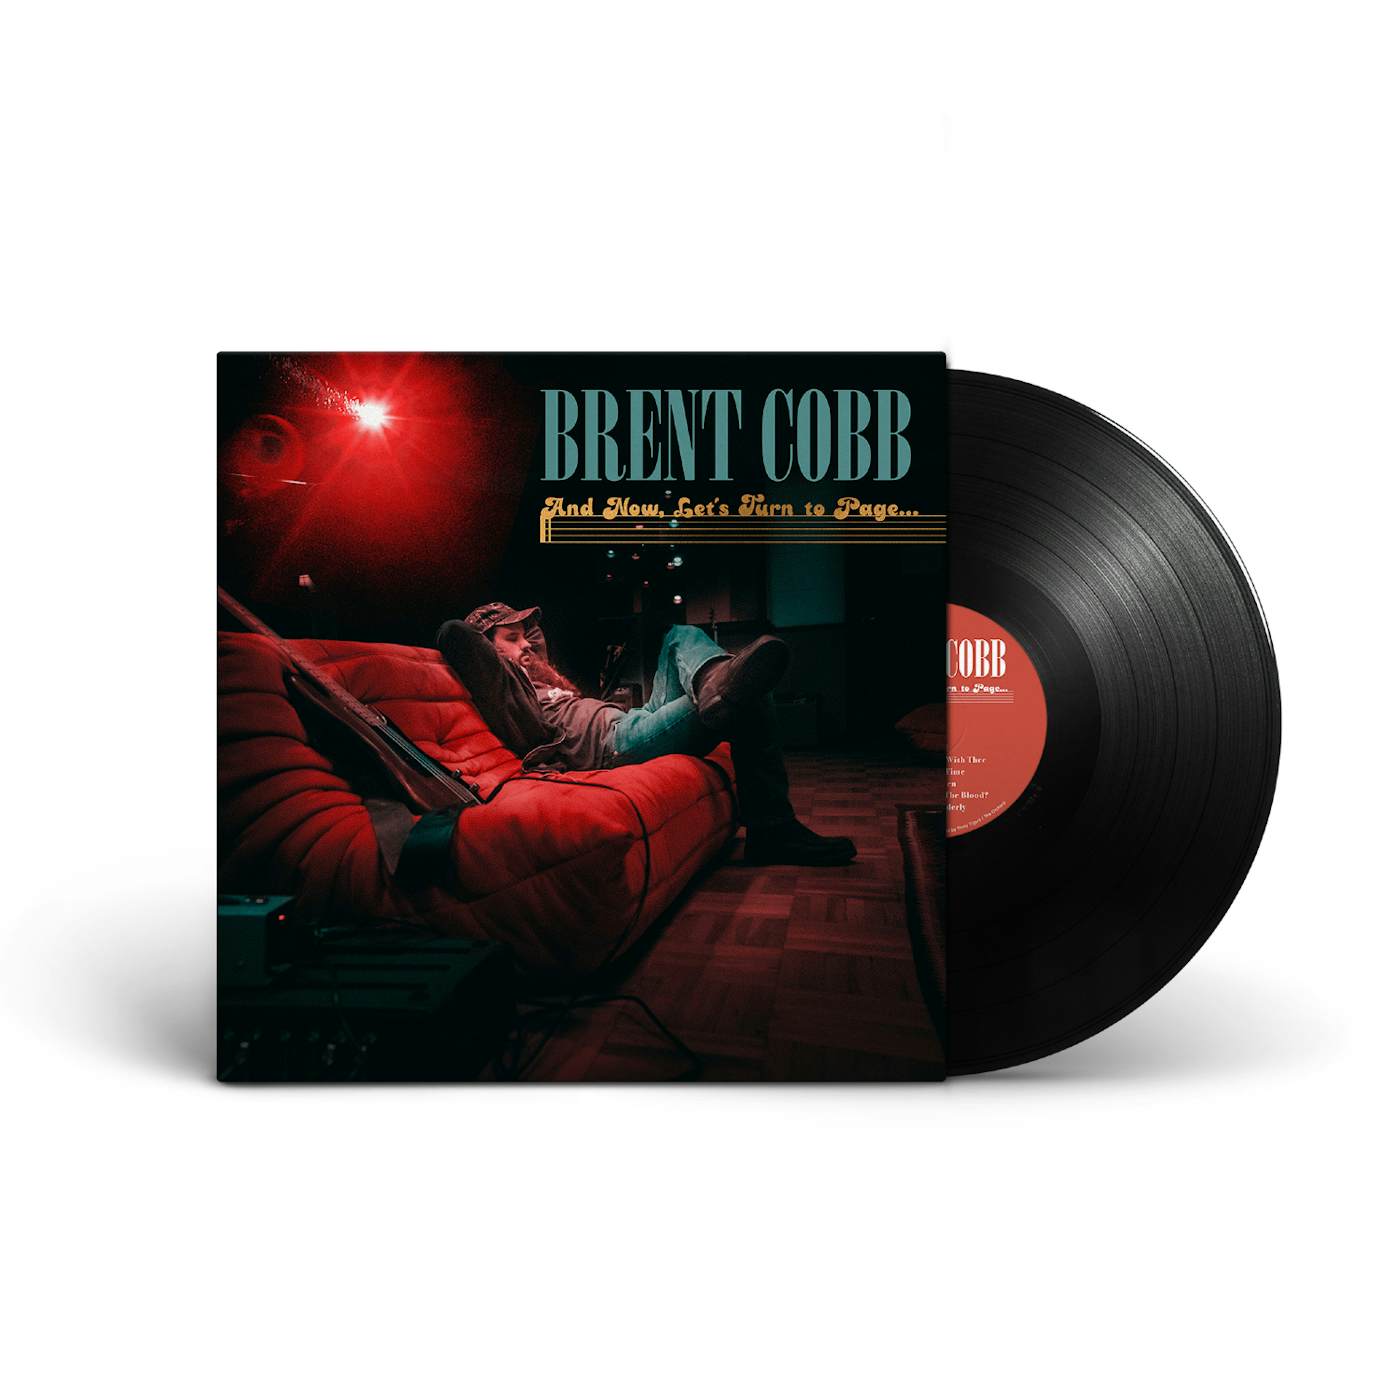 Brent Cobb "And Now Let's Turn To Page..." Vinyl